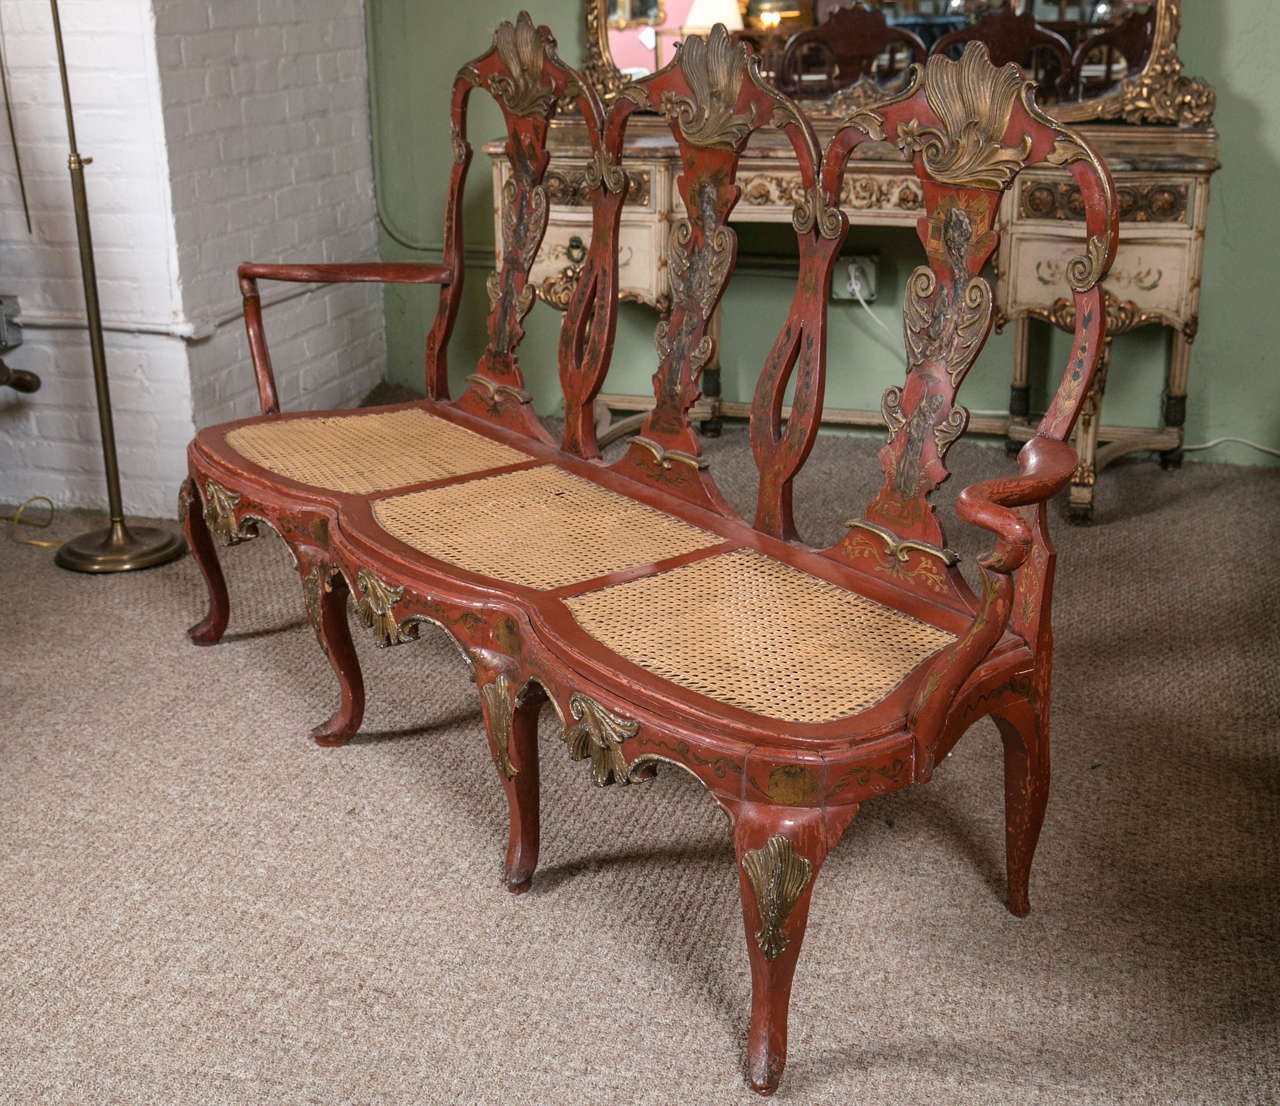 Early 19th century red painted continental bench. This spectacular chinoiserie influenced hall bench or settee has been done in a fine rust paint decorated background with all-over chinoiserie design. The overall structure very well done with fine